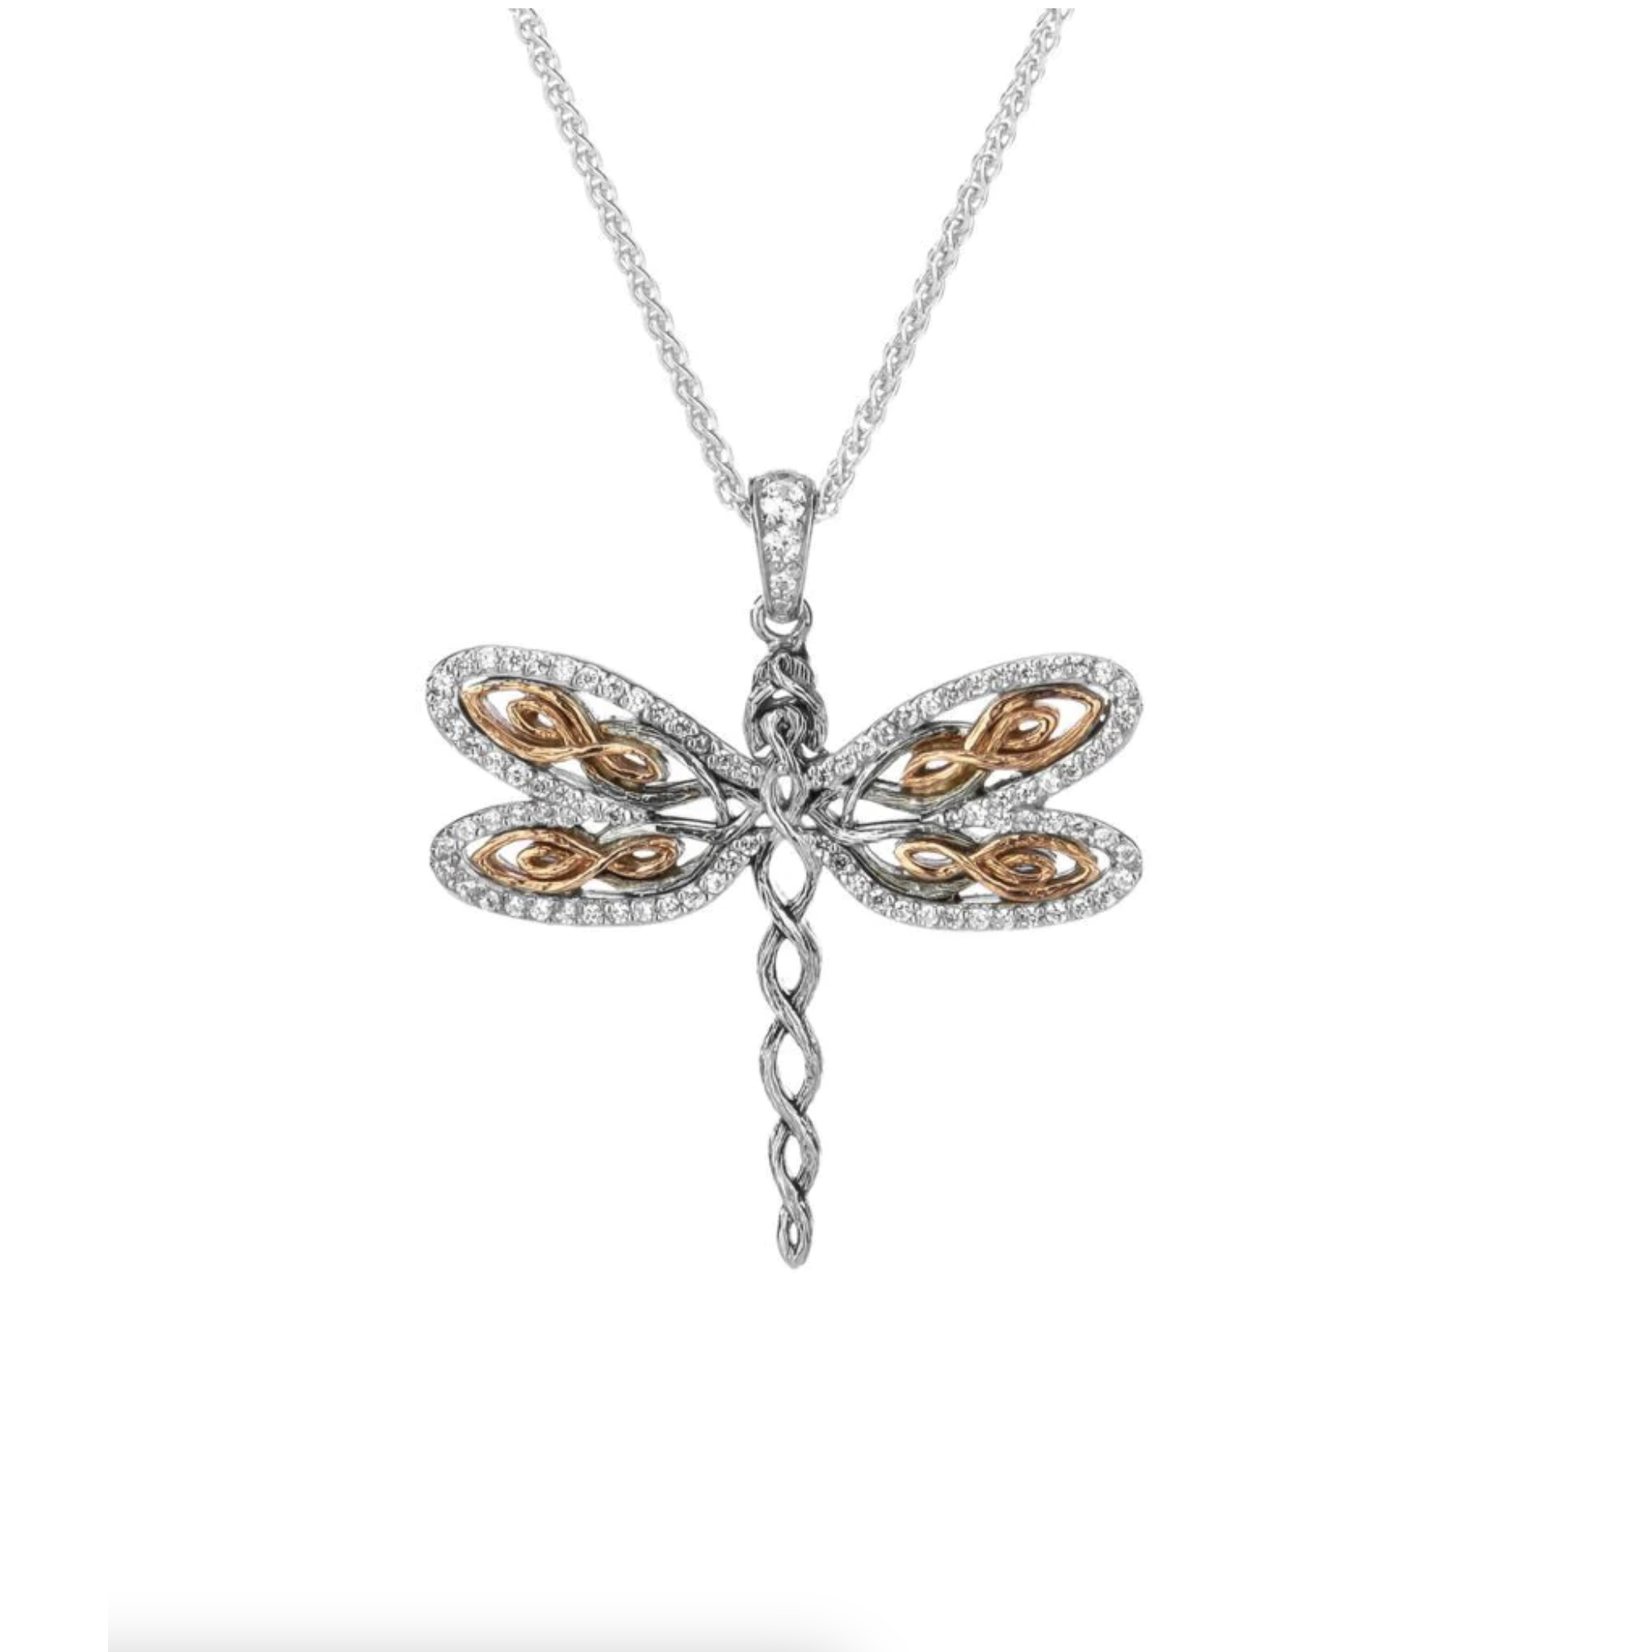 Keith Jack Silver and 10K RG Dragonfly Necklace